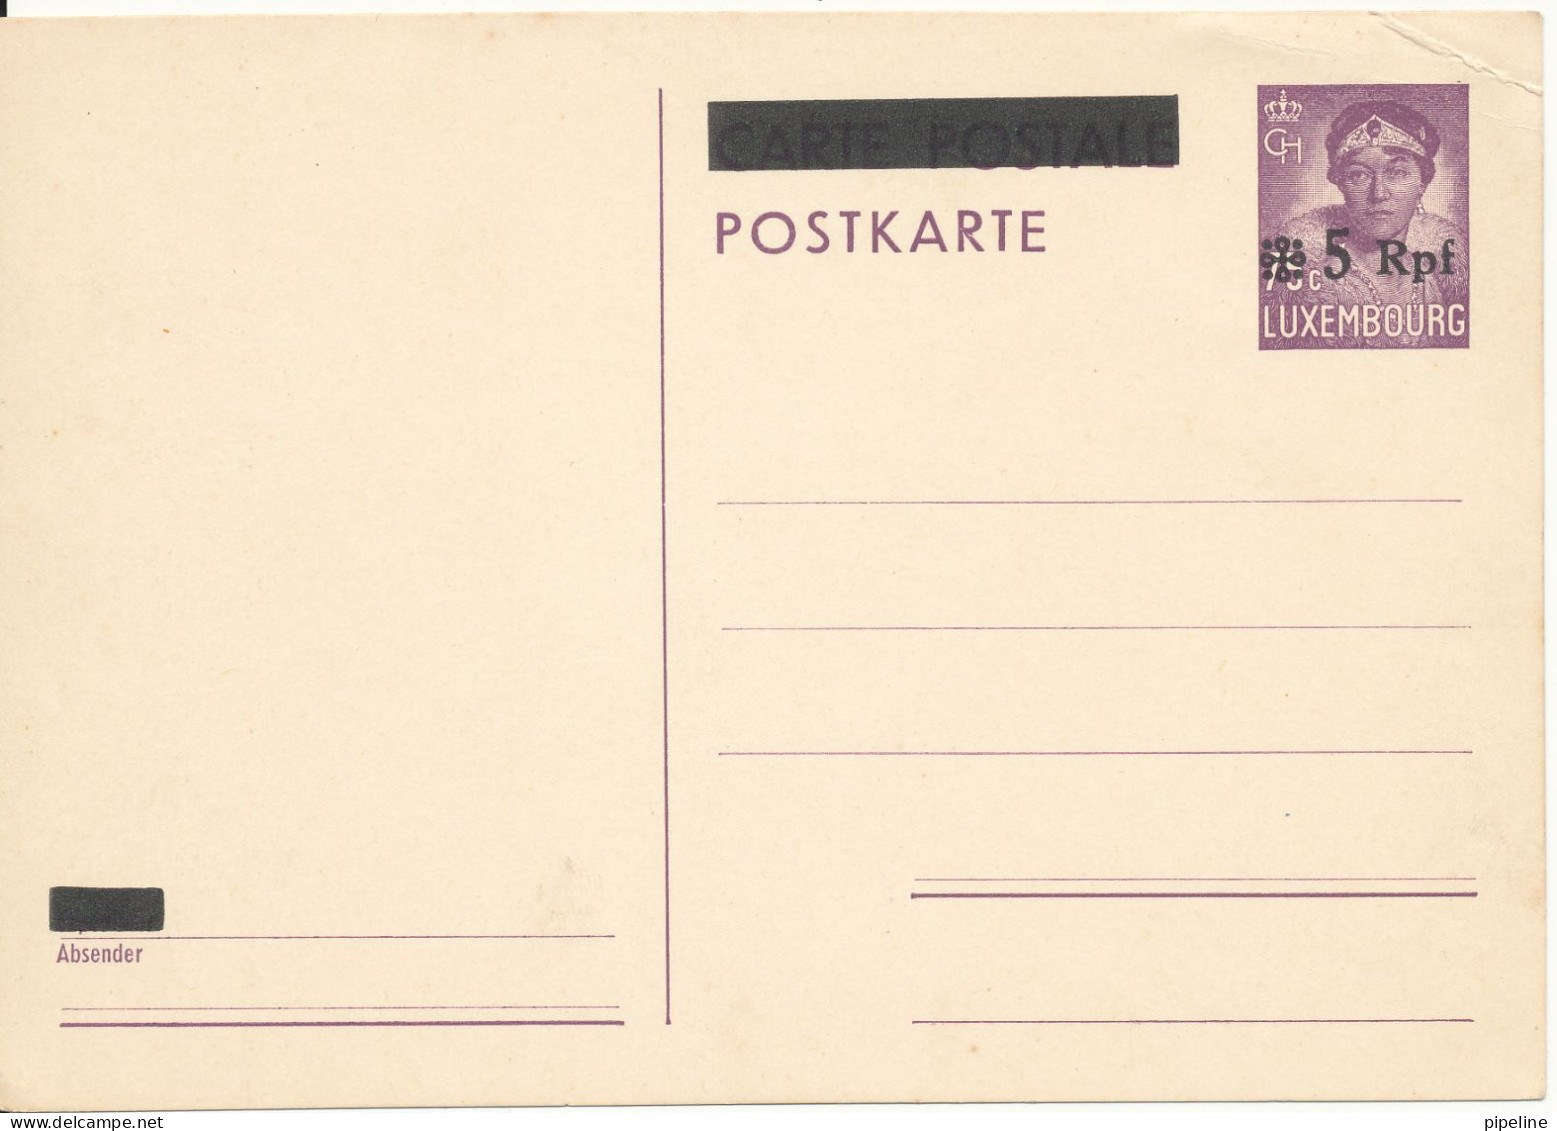 Luxembourg Postal Stationery Postcard Overprinted In Mint Condition (a Weak Corner Of The Card) - Ganzsachen